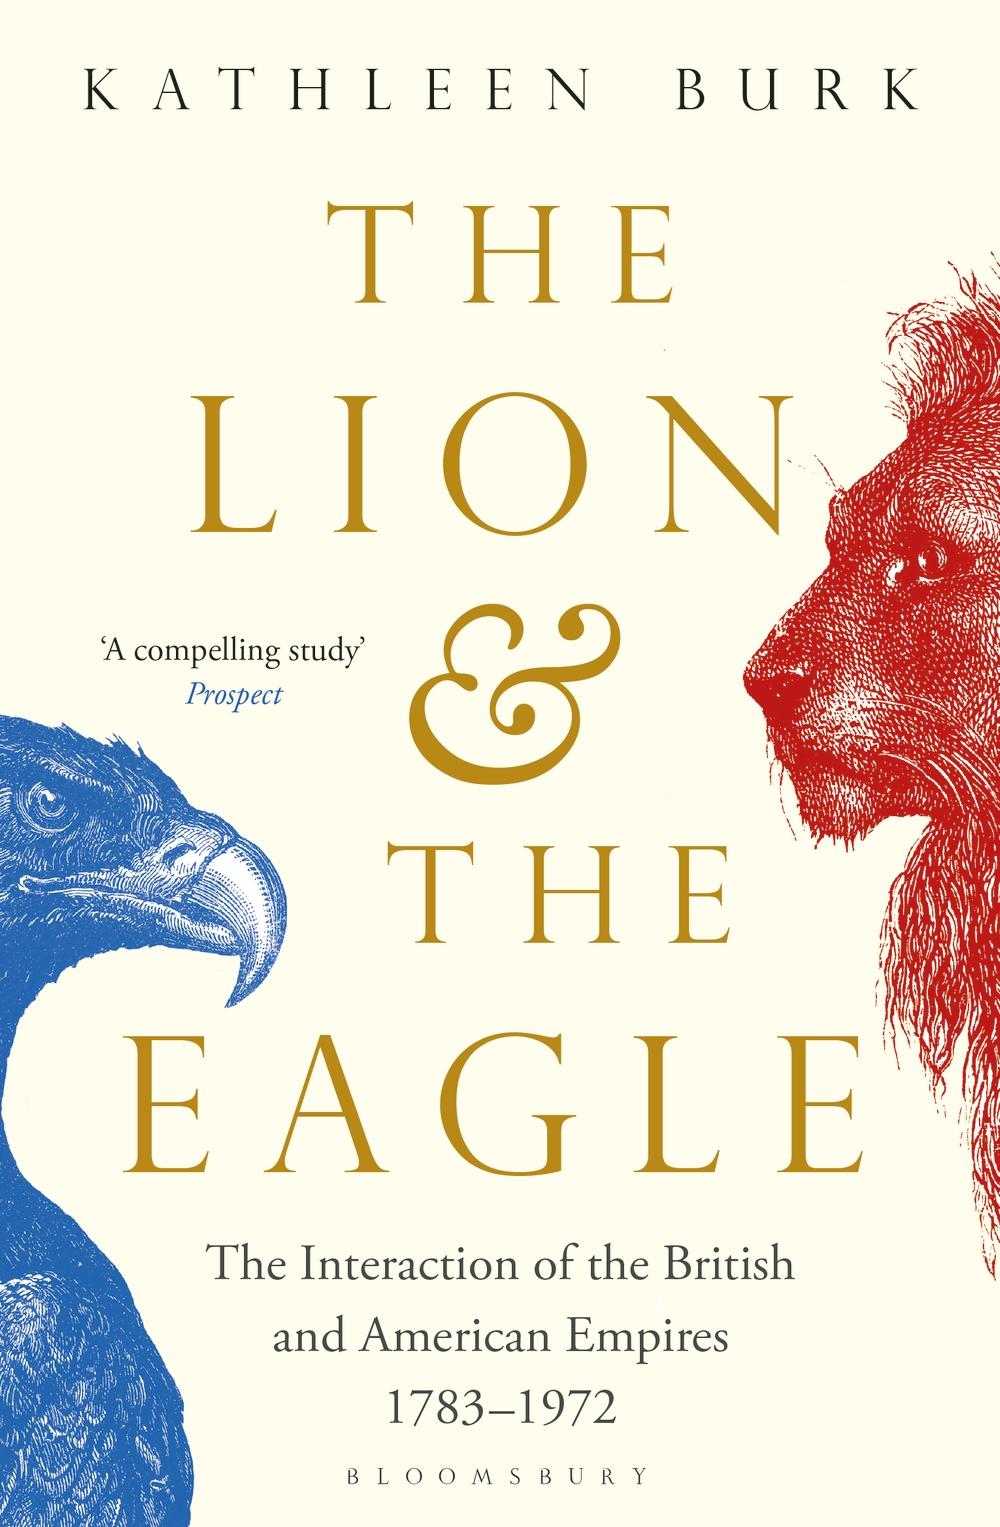 Lion and the Eagle - Kathleen Burk